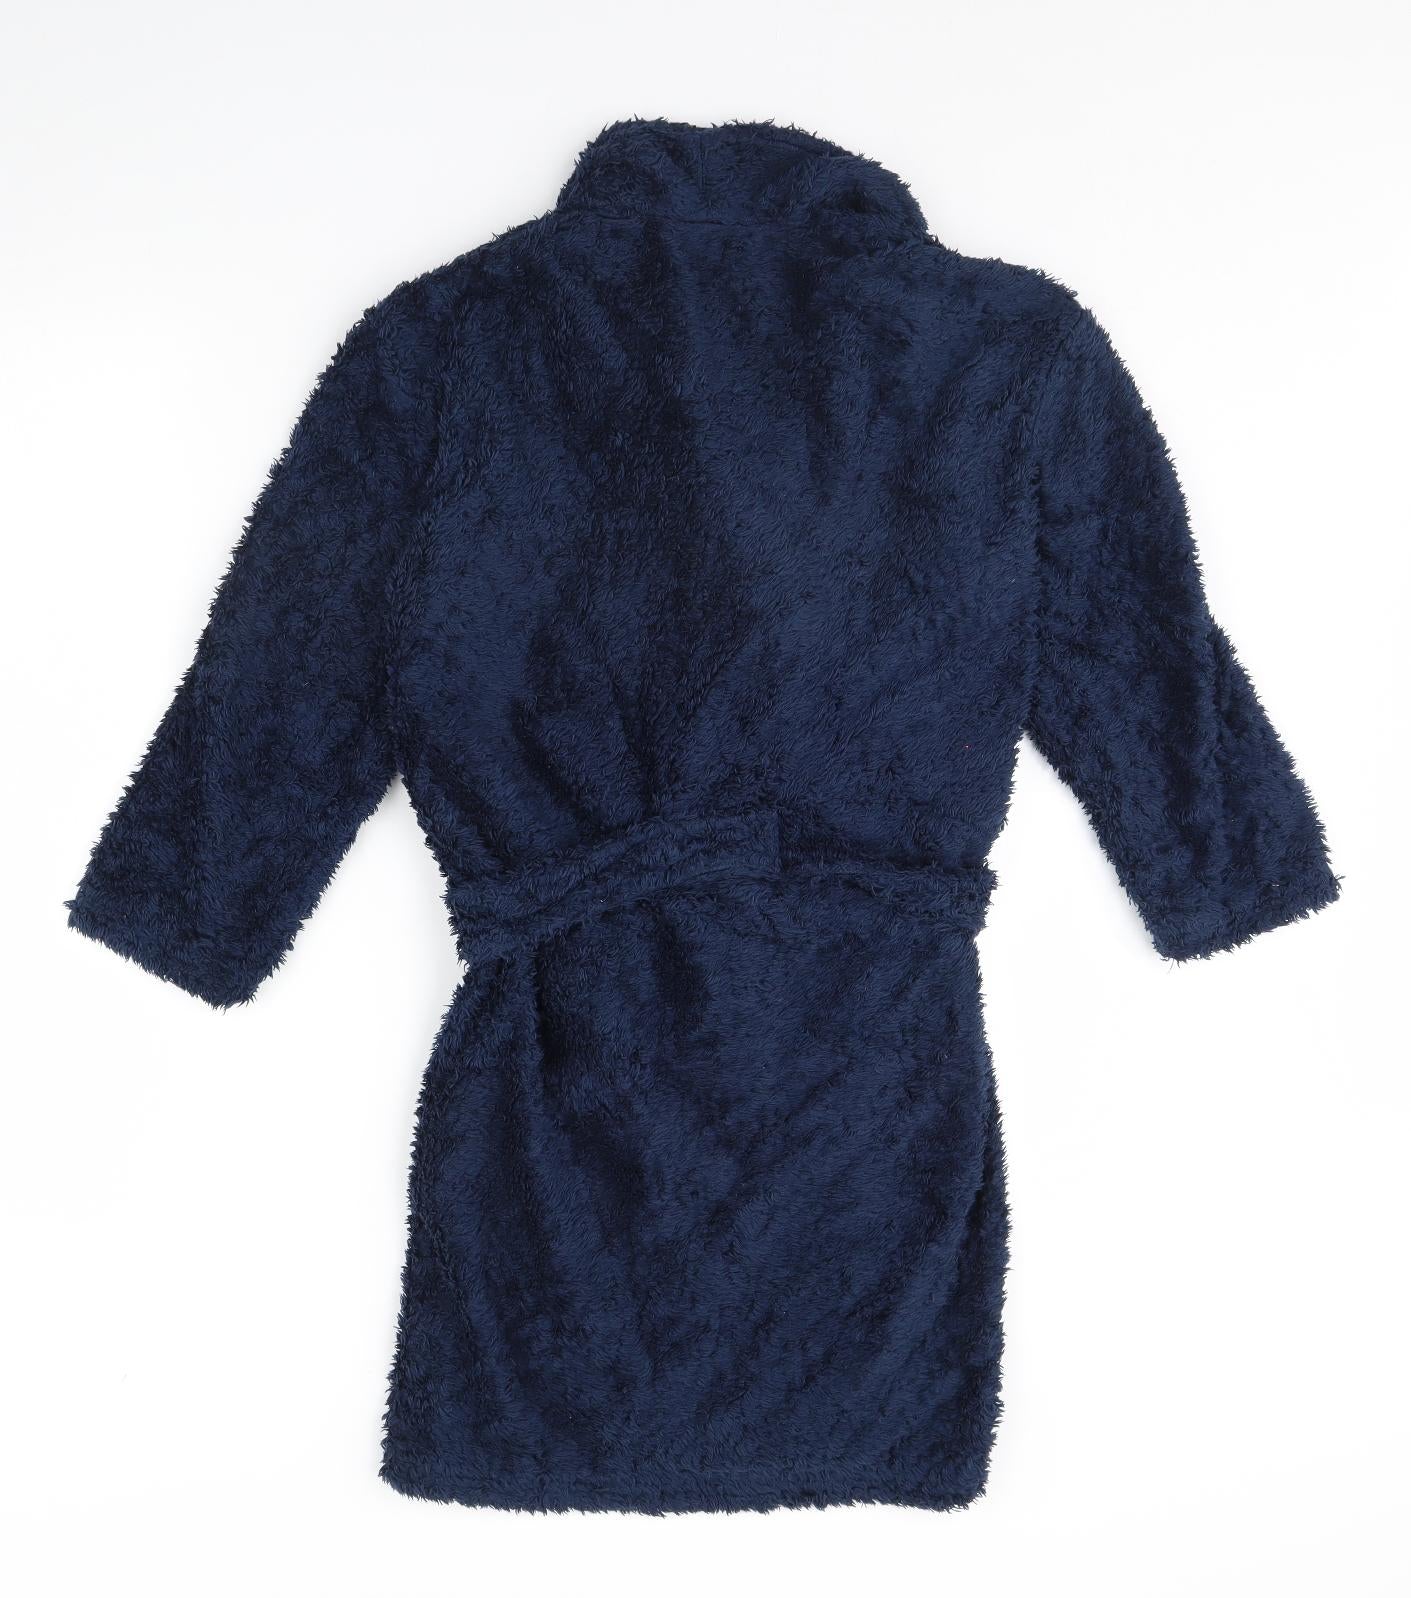 NEXT Boys Blue Solid Fleece  Gown Size 10 Years